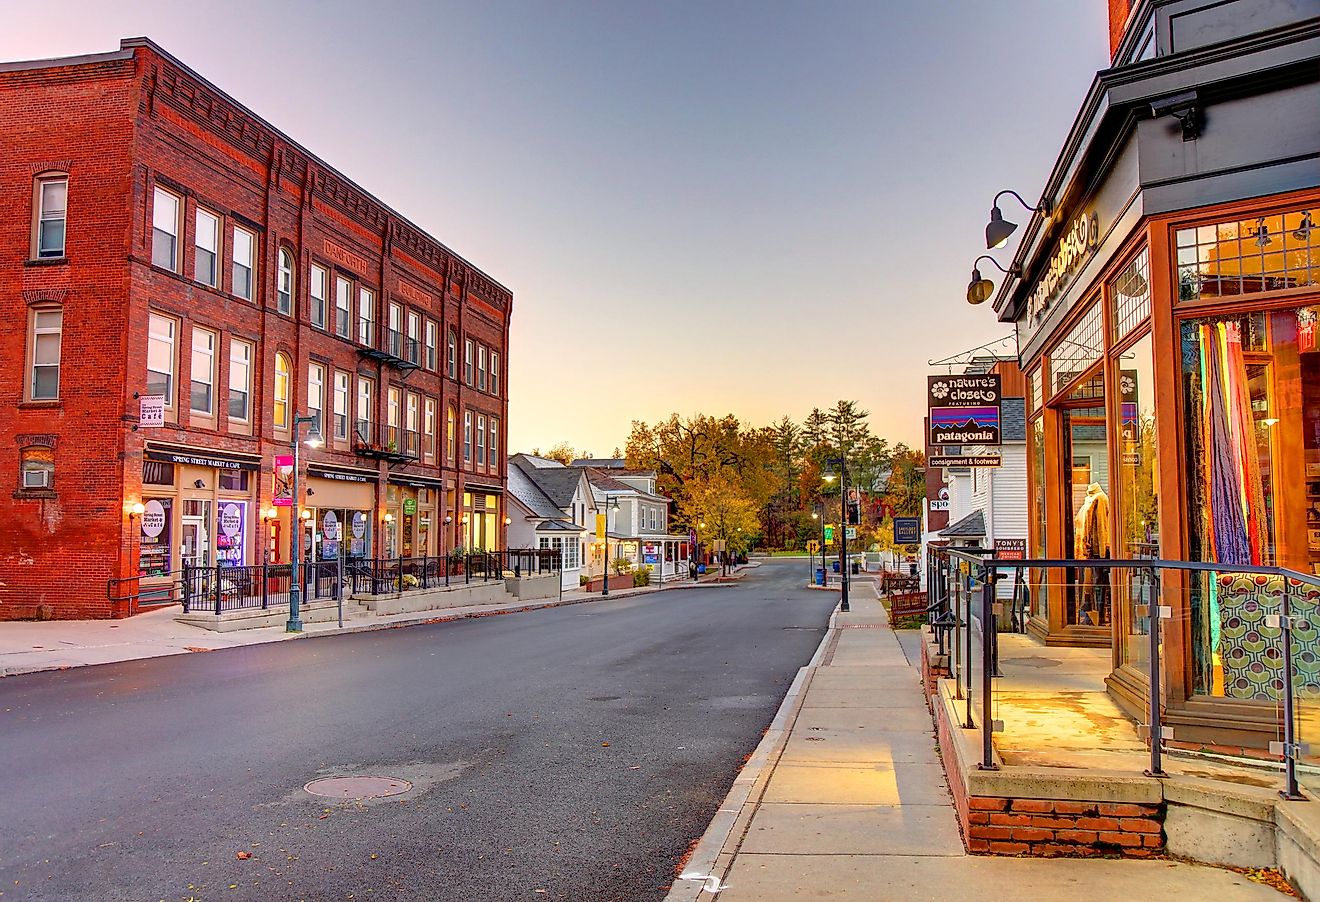 Williamstown, Massachusetts: Morning view of shops along Spring Street in the downtown district, via DenisTangneyJr / iStock.com